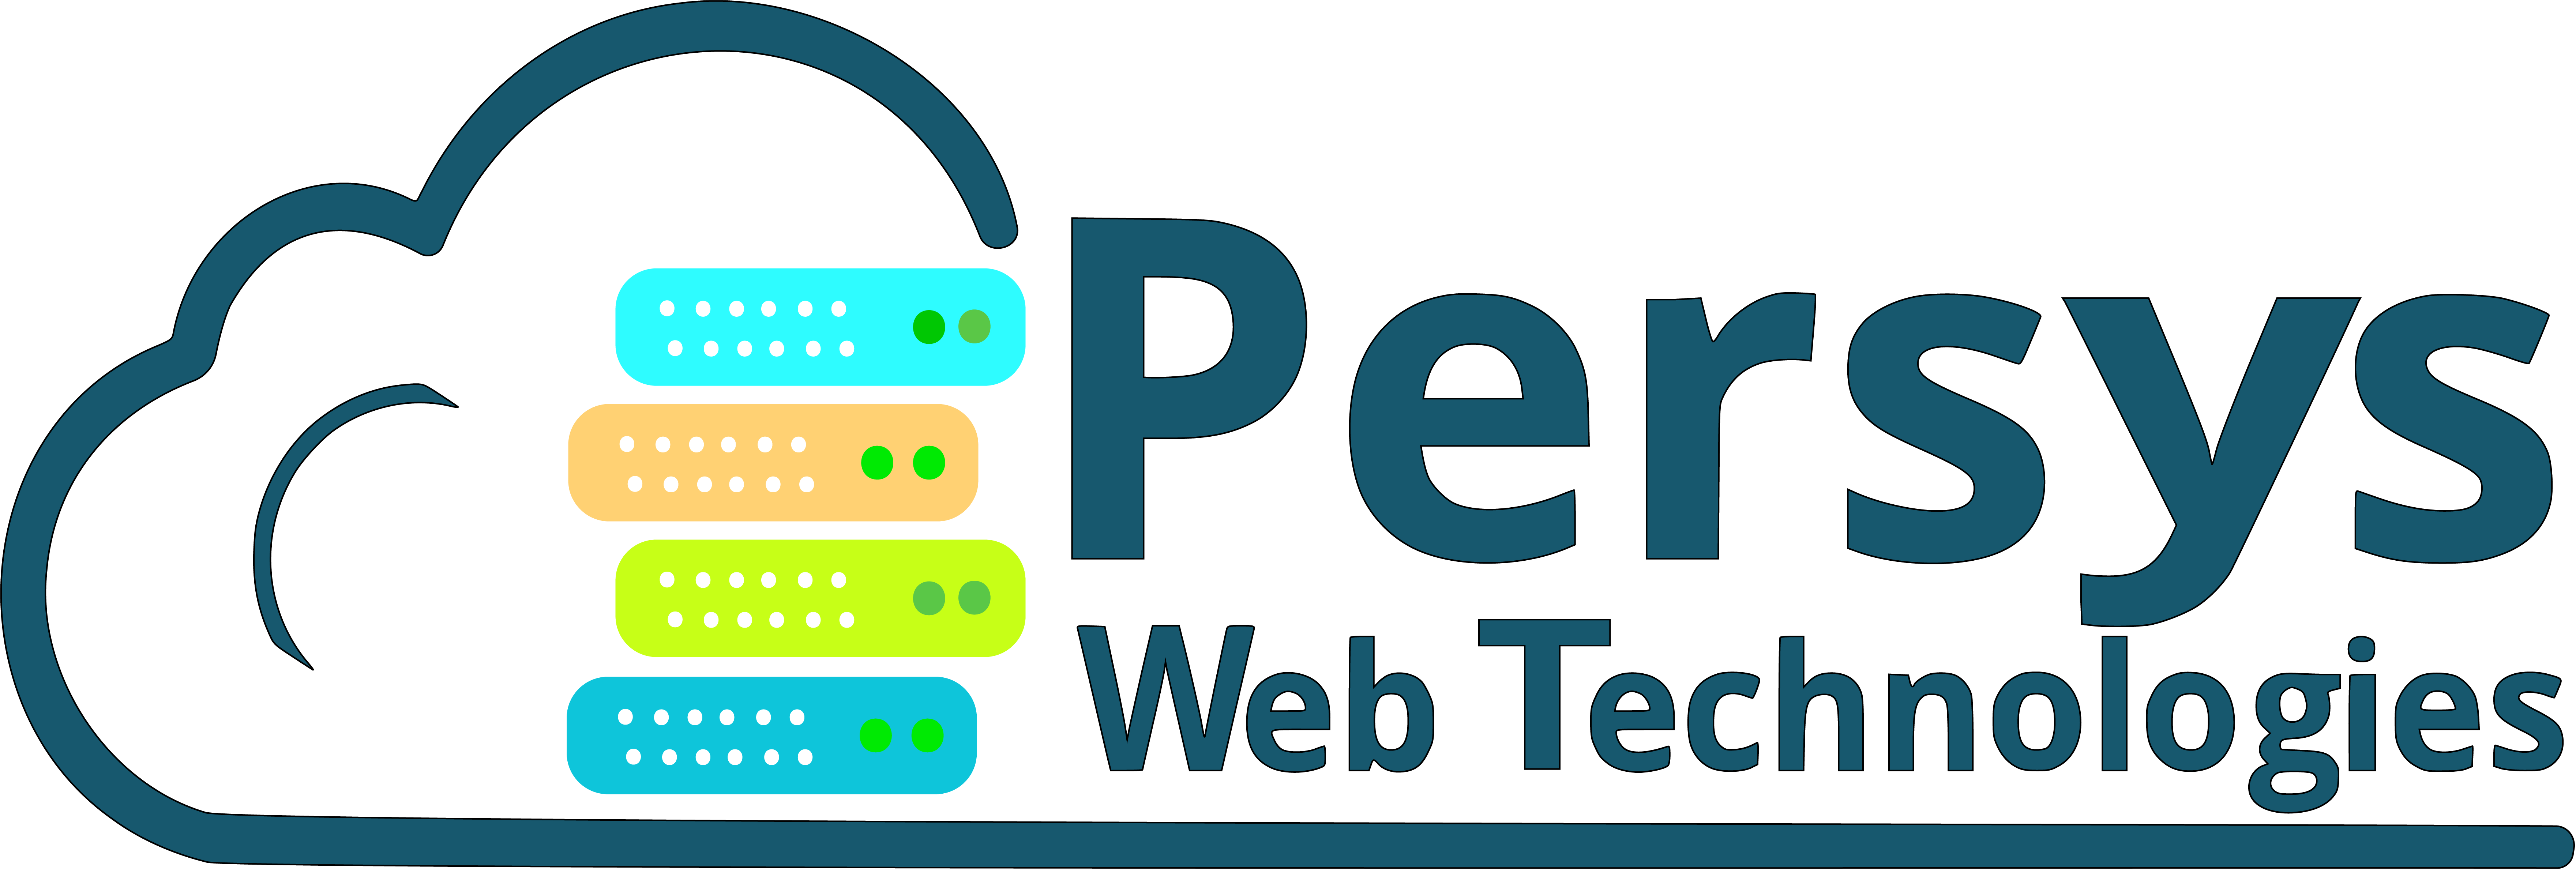 Persys Web Technologies